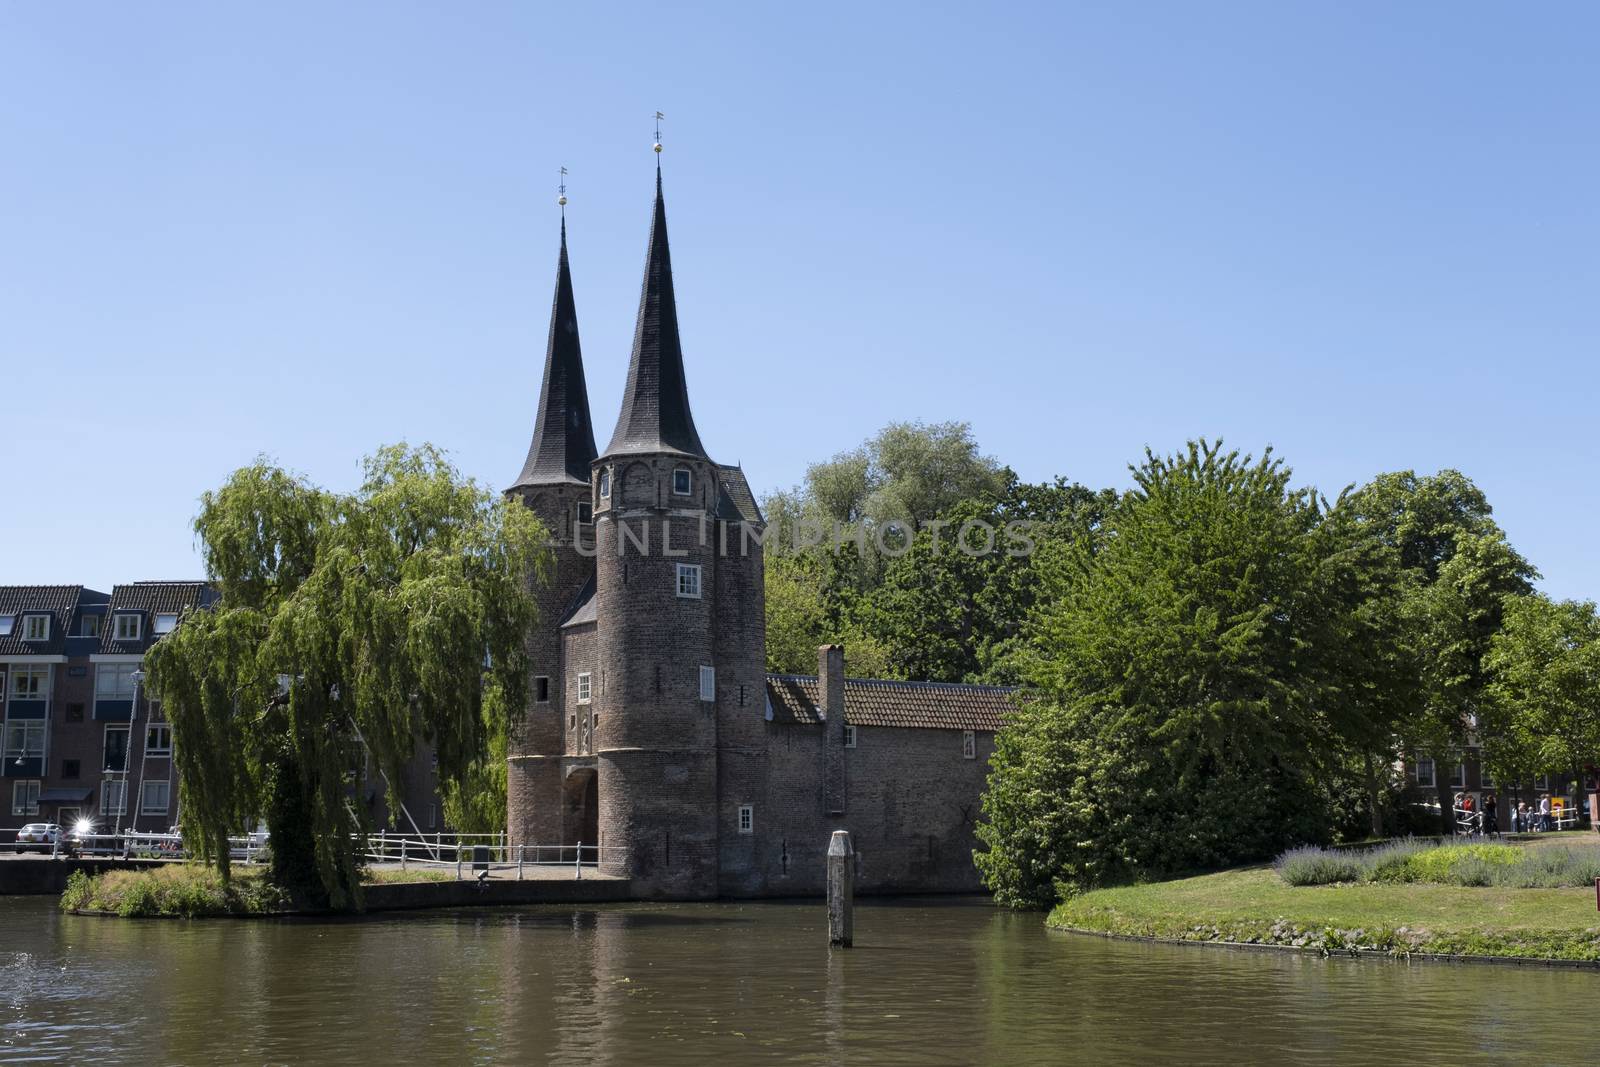 The Eastern Gate Oostpoort in Delft, an example of Brick Gothic northern European architecture, was built around 1400